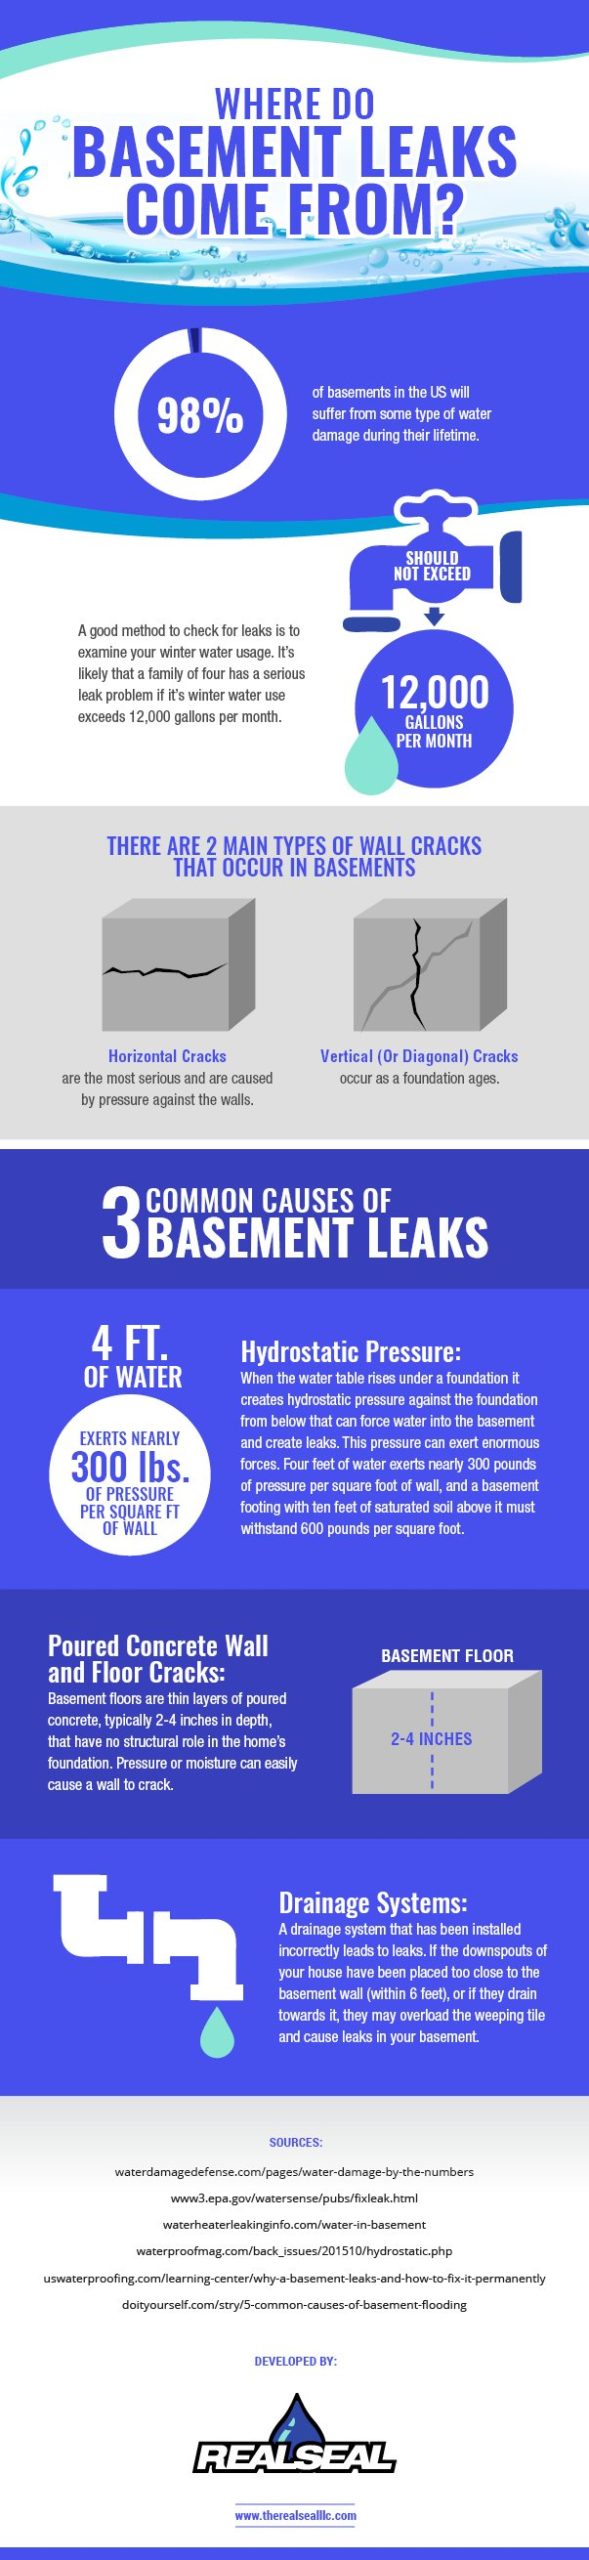 Wet Basement Syndrome: Find the Source of Basement Leaks